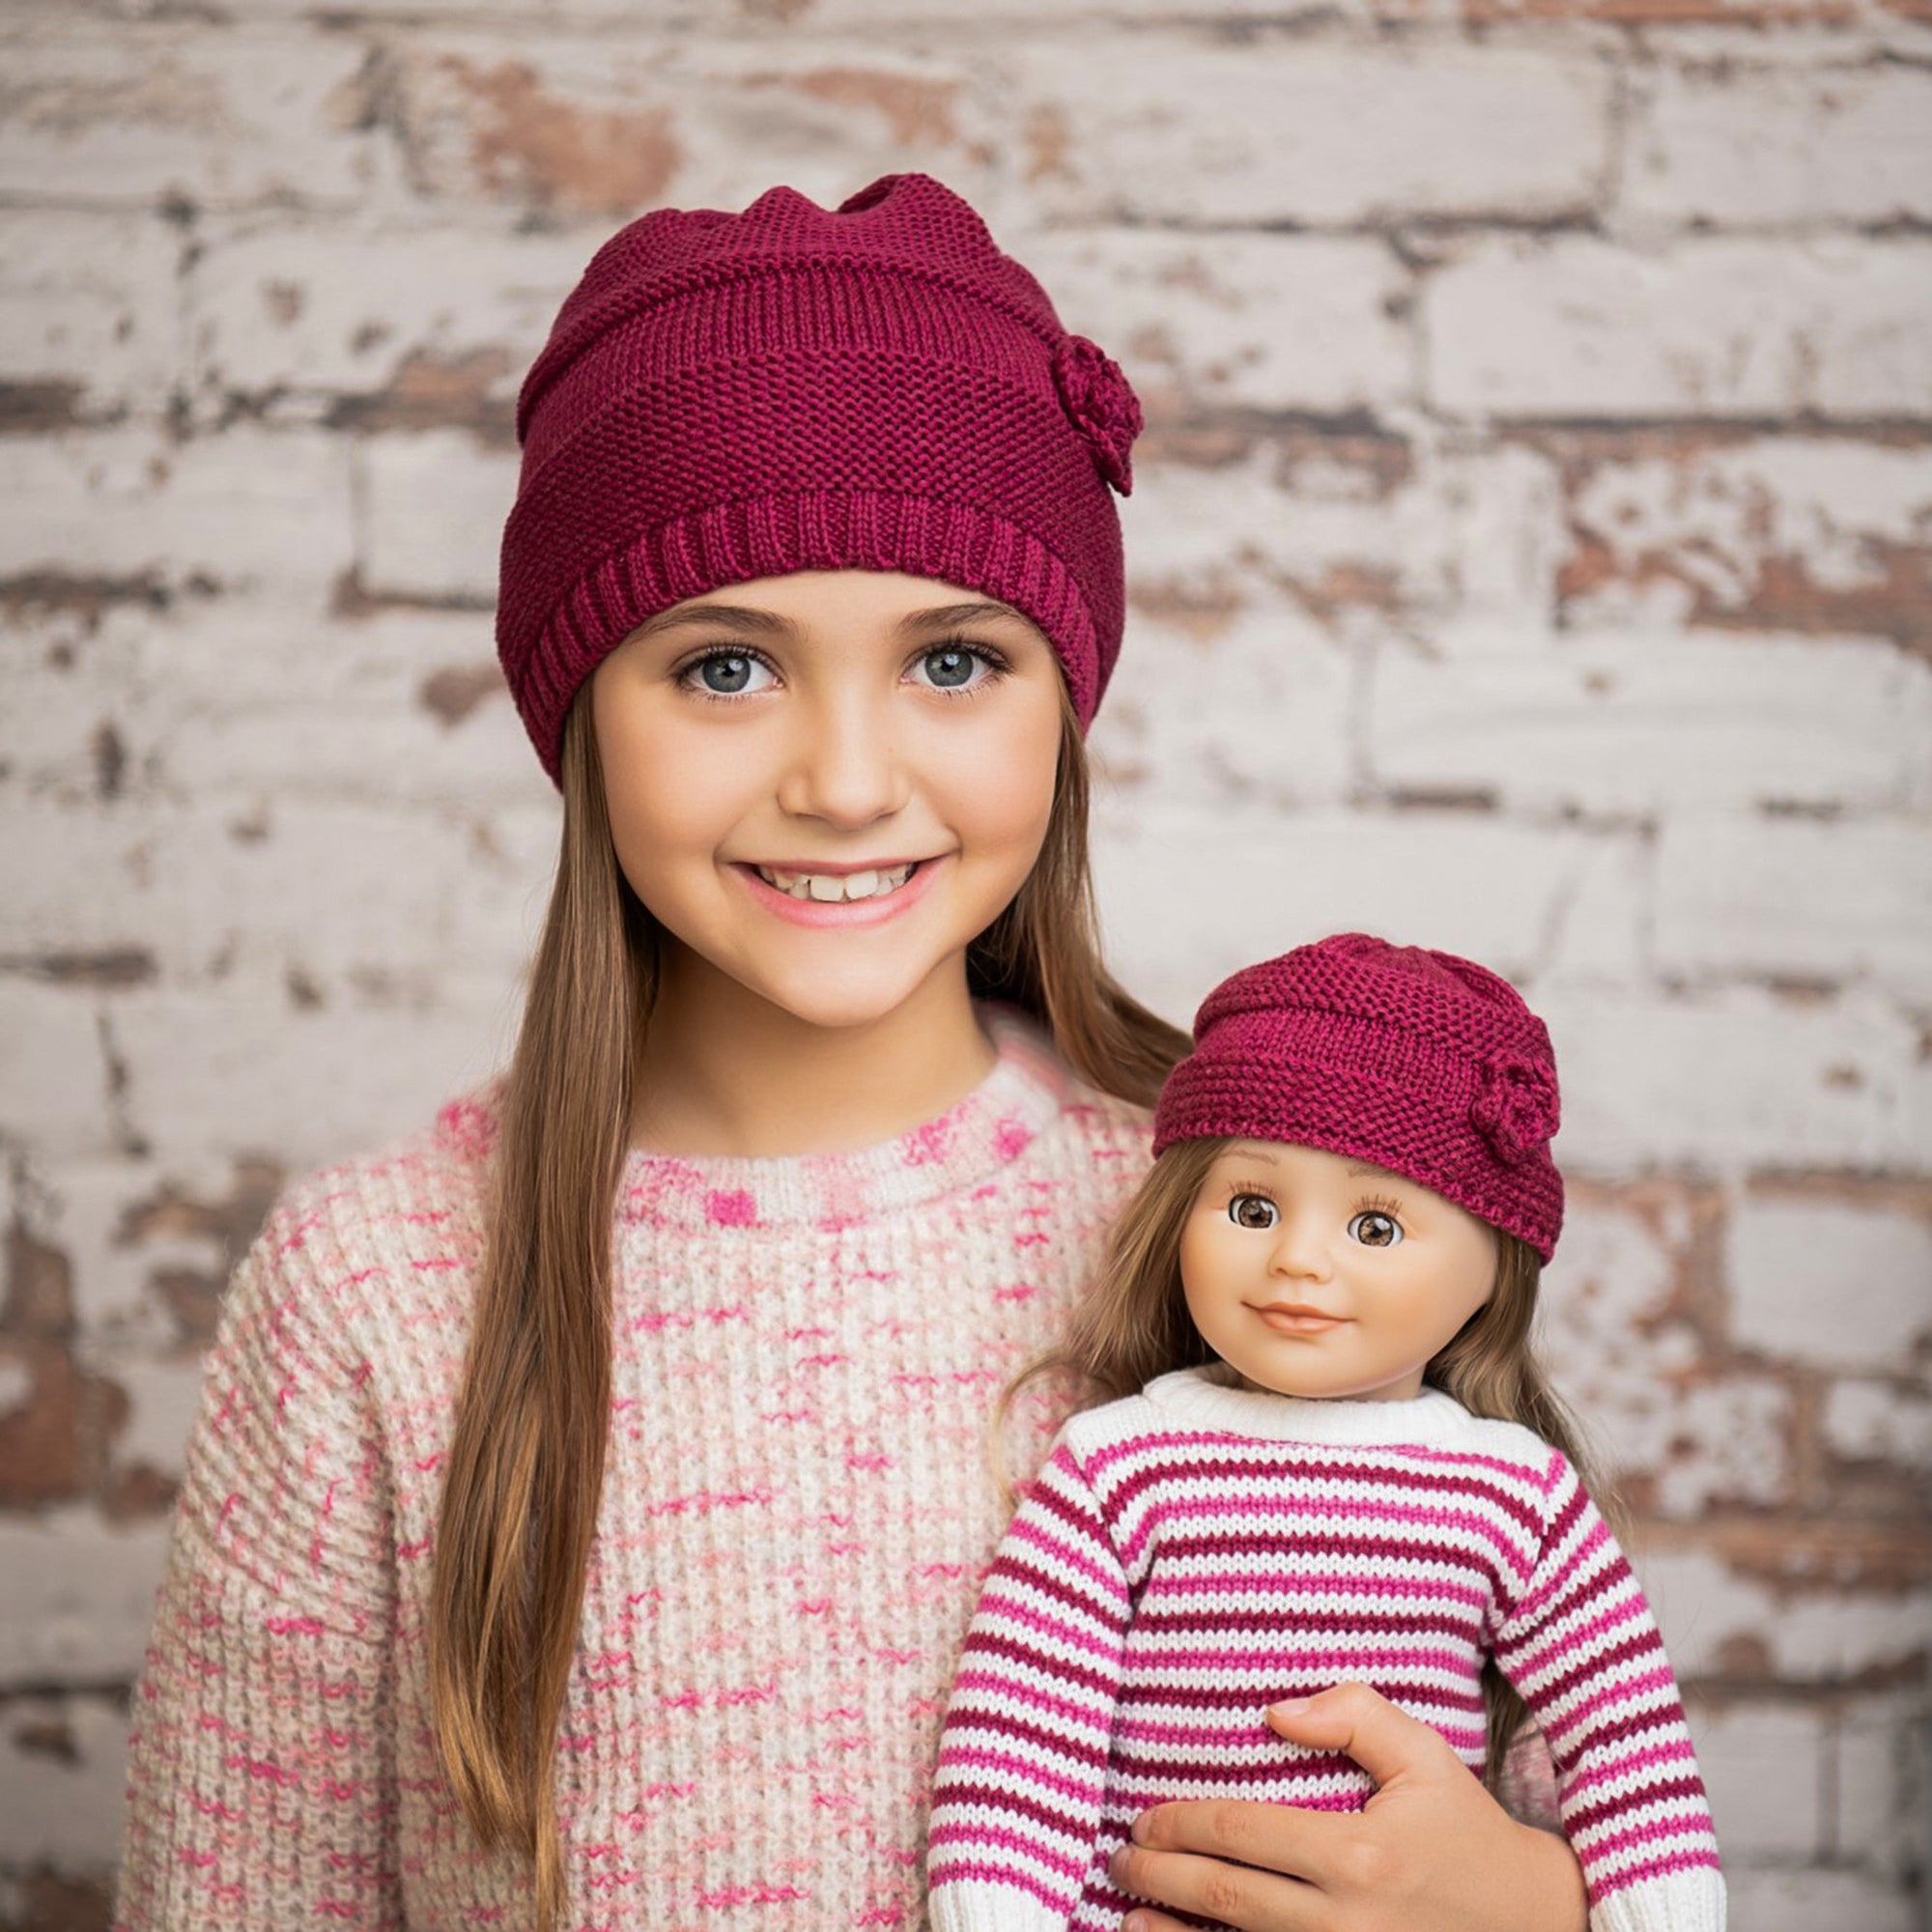 Maplelea Dress Alike : Matching Clothing for Dolls, Girls and Families